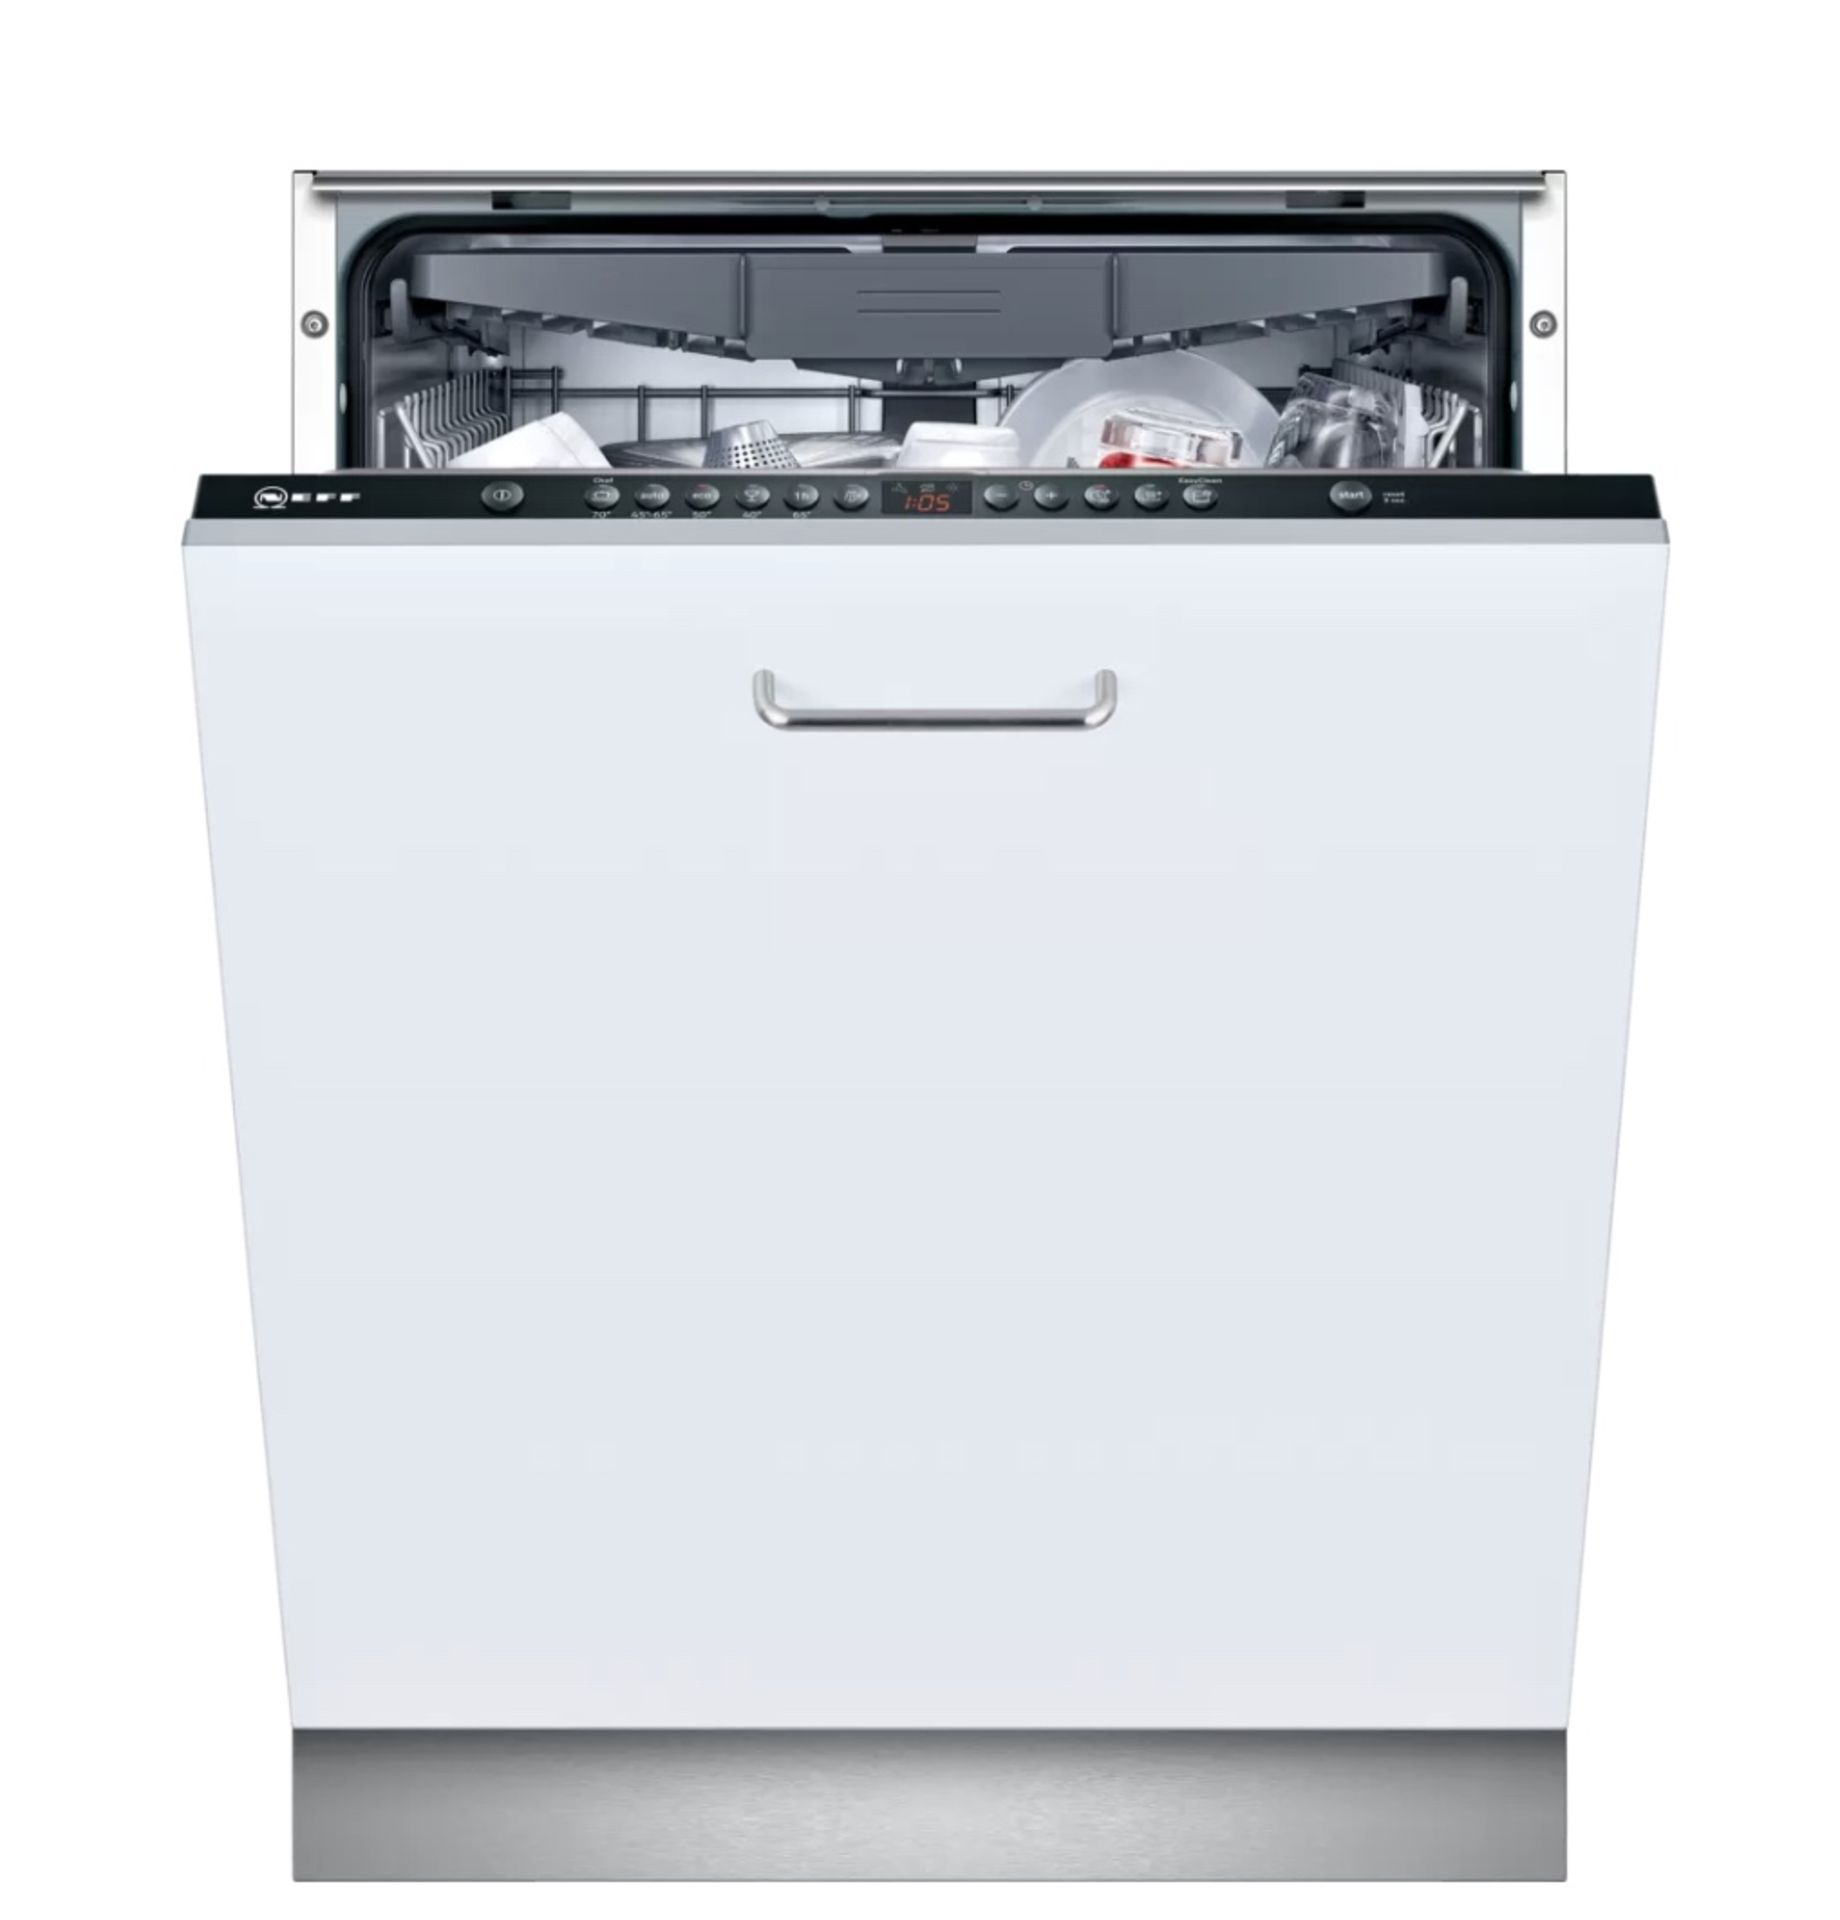 Neff S513K60X0G 13 Place Fully Integrated Dishwasher (Refurbished) RRP £629